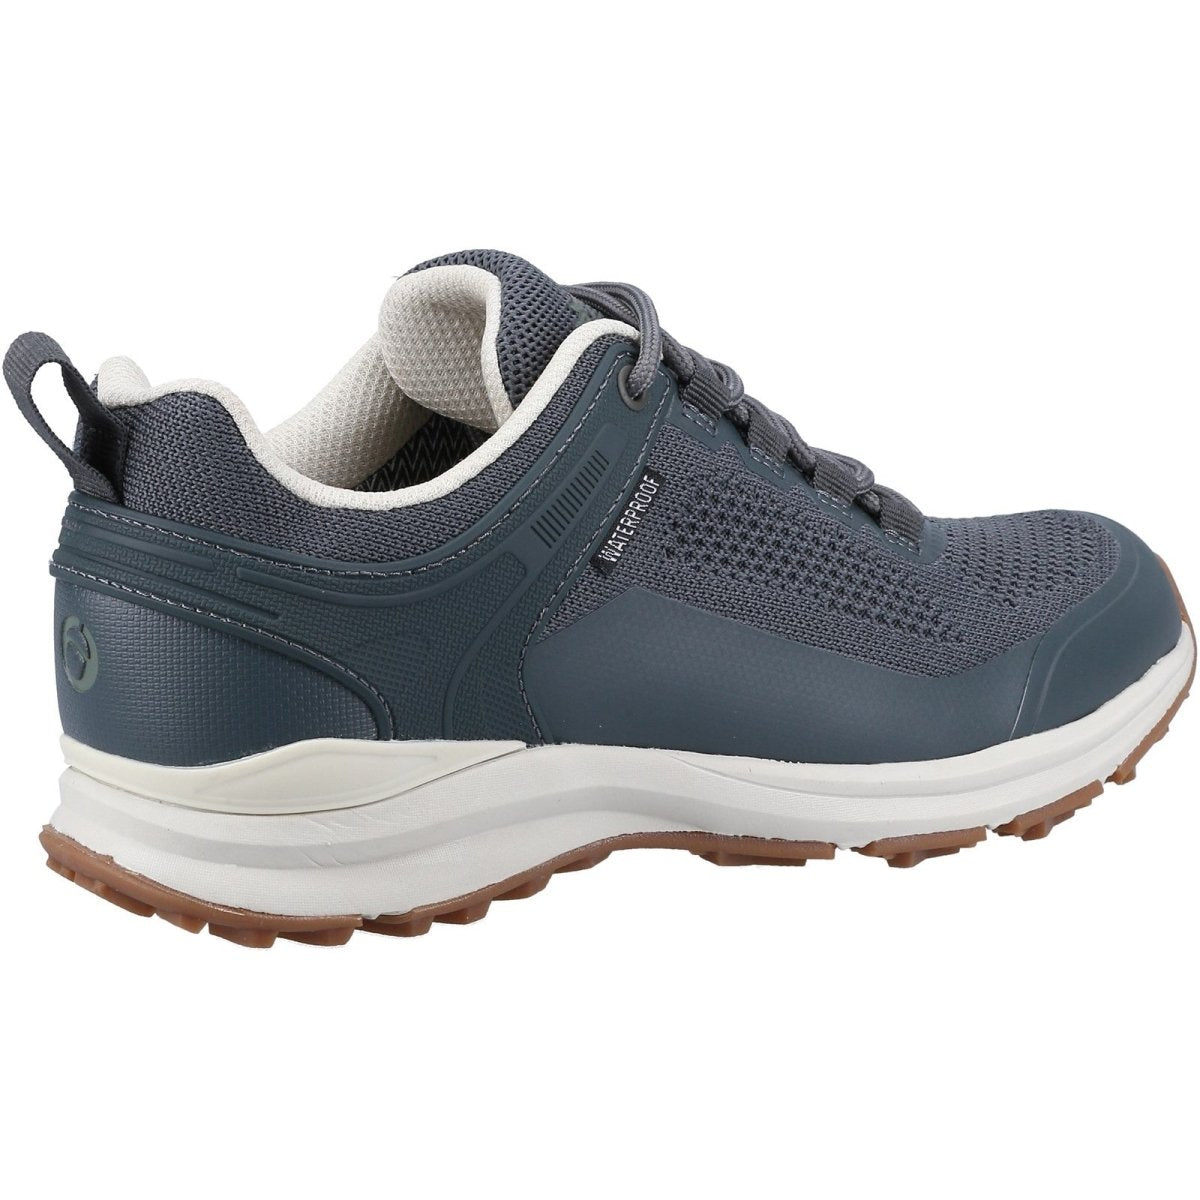 Cotswold Compton Ladies Waterproof Hiking Trainers - Shoe Store Direct